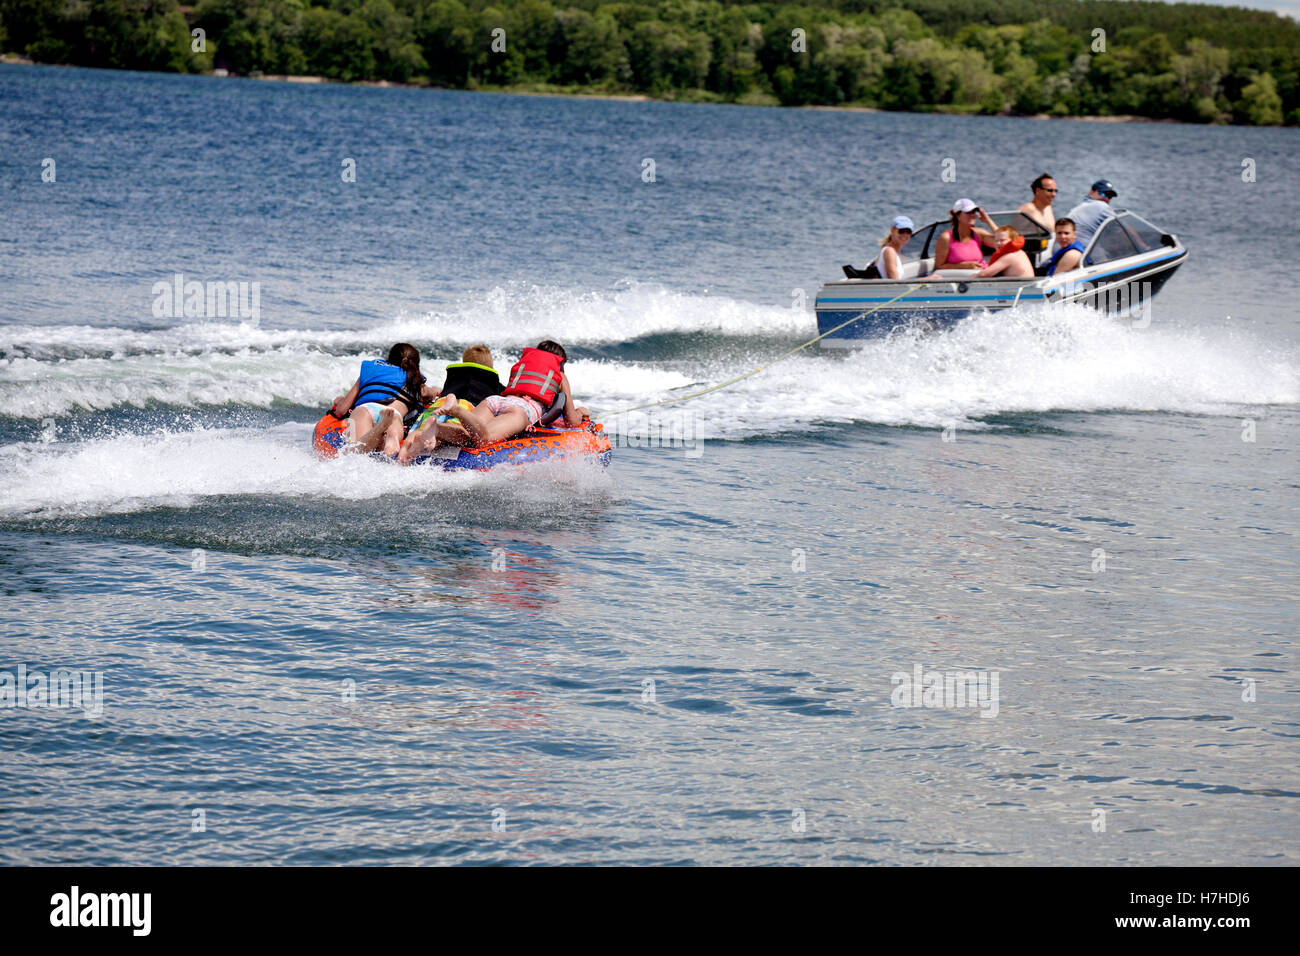 Parents pull three kids on a water tube with a speed boat on a lake. Clitherall Minnesota MN USA Stock Photo